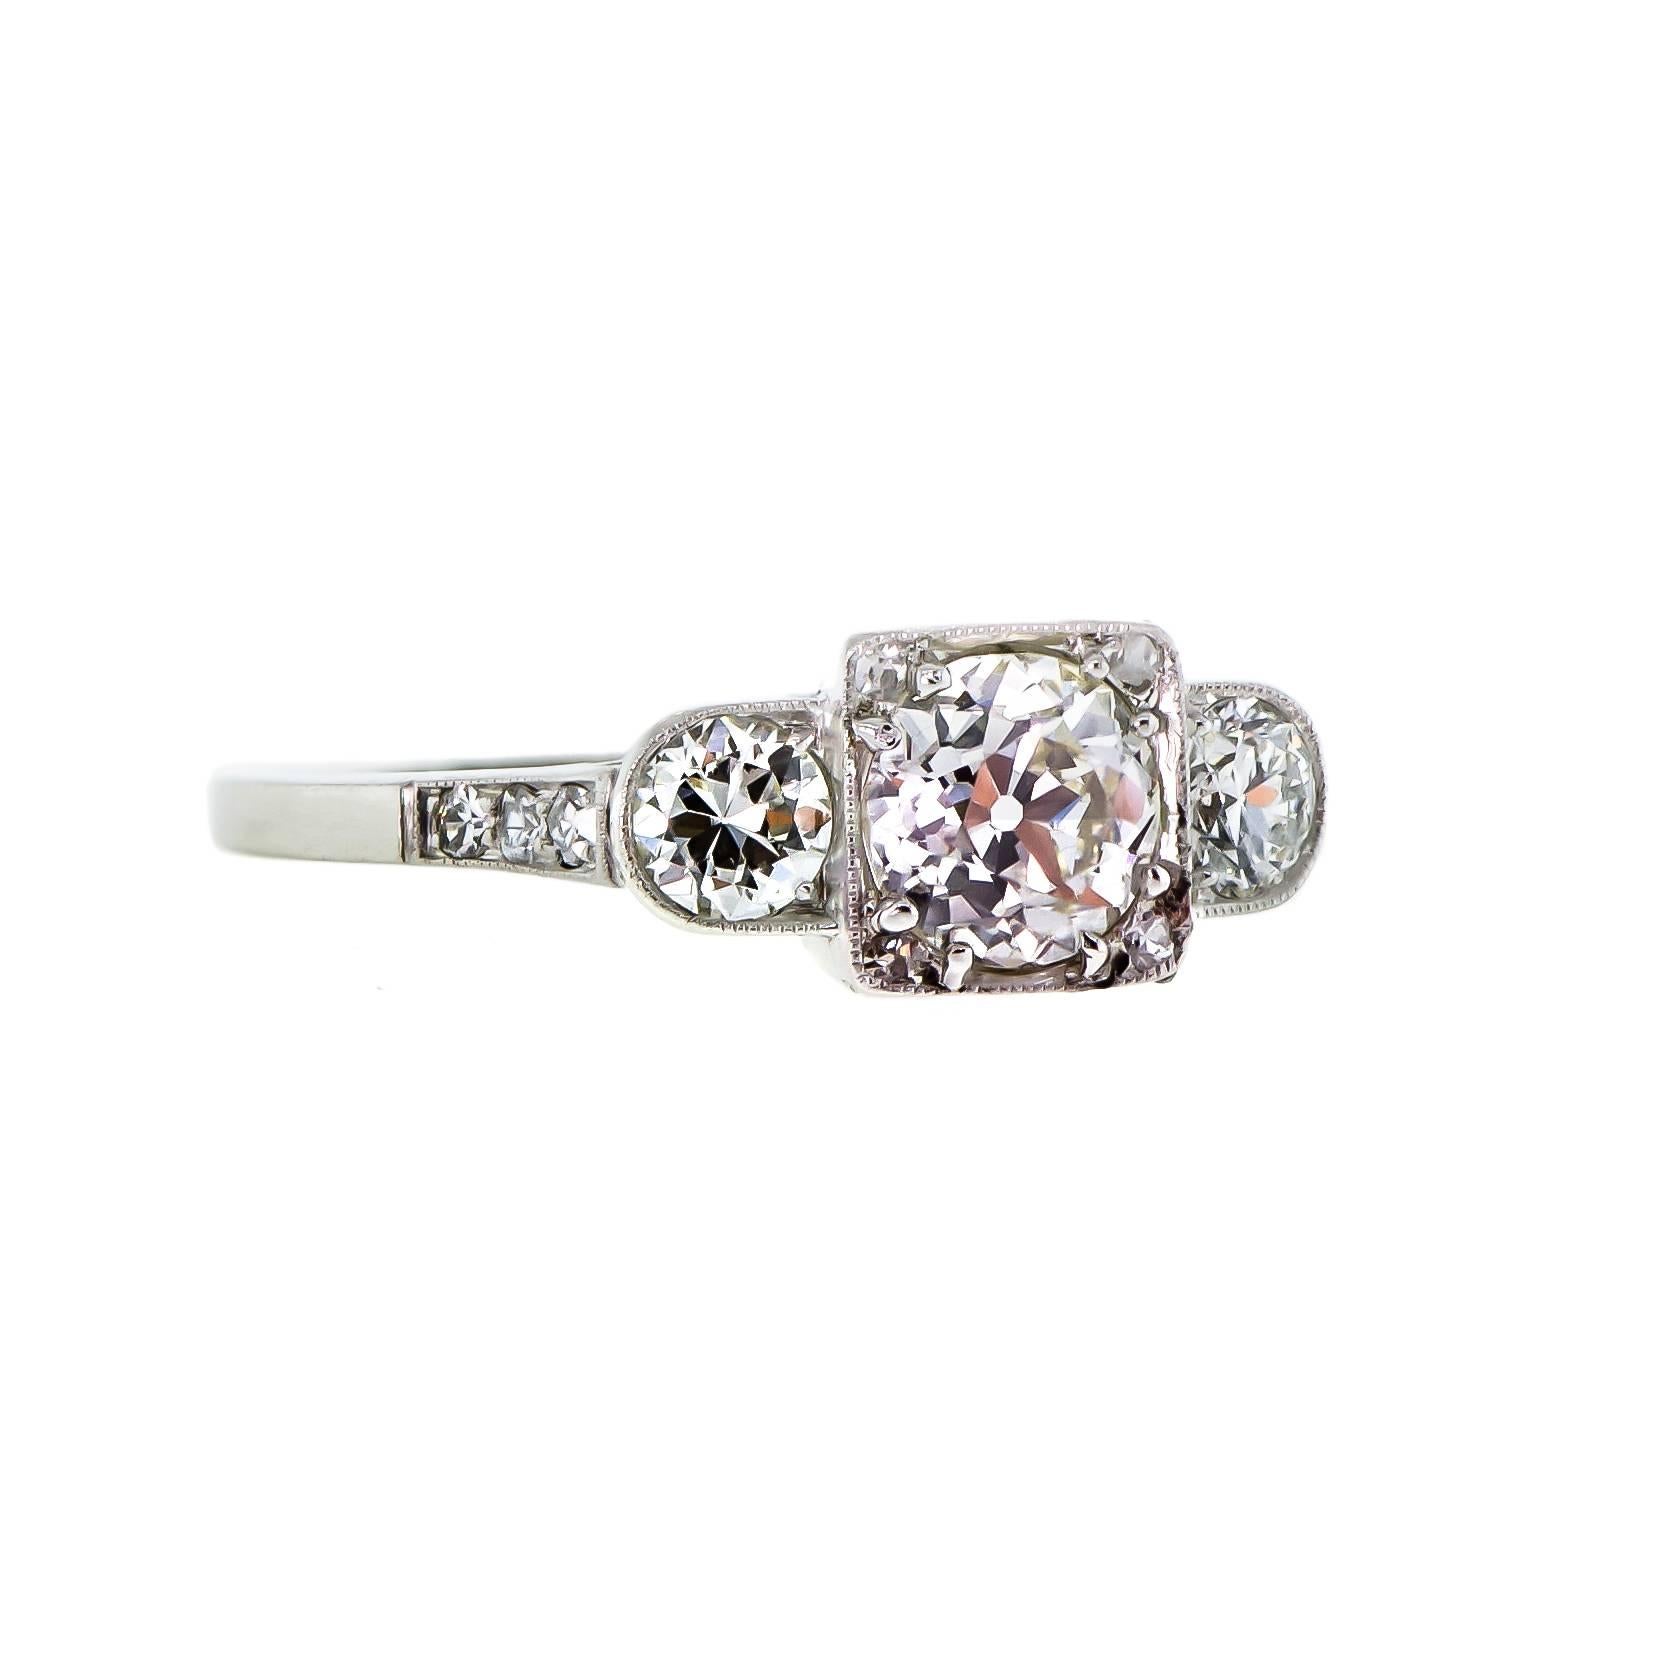 Art Deco platinum diamond three stone diamond ring centrally set with one Old European Cut diamond weighing approximately .97 cts, 6.20 6.20 X 3.99 VS-1, K , two bead set Old European cut diamonds approx. total weight .50 ct. , 4.00 - 3.90 x 2.60 mm